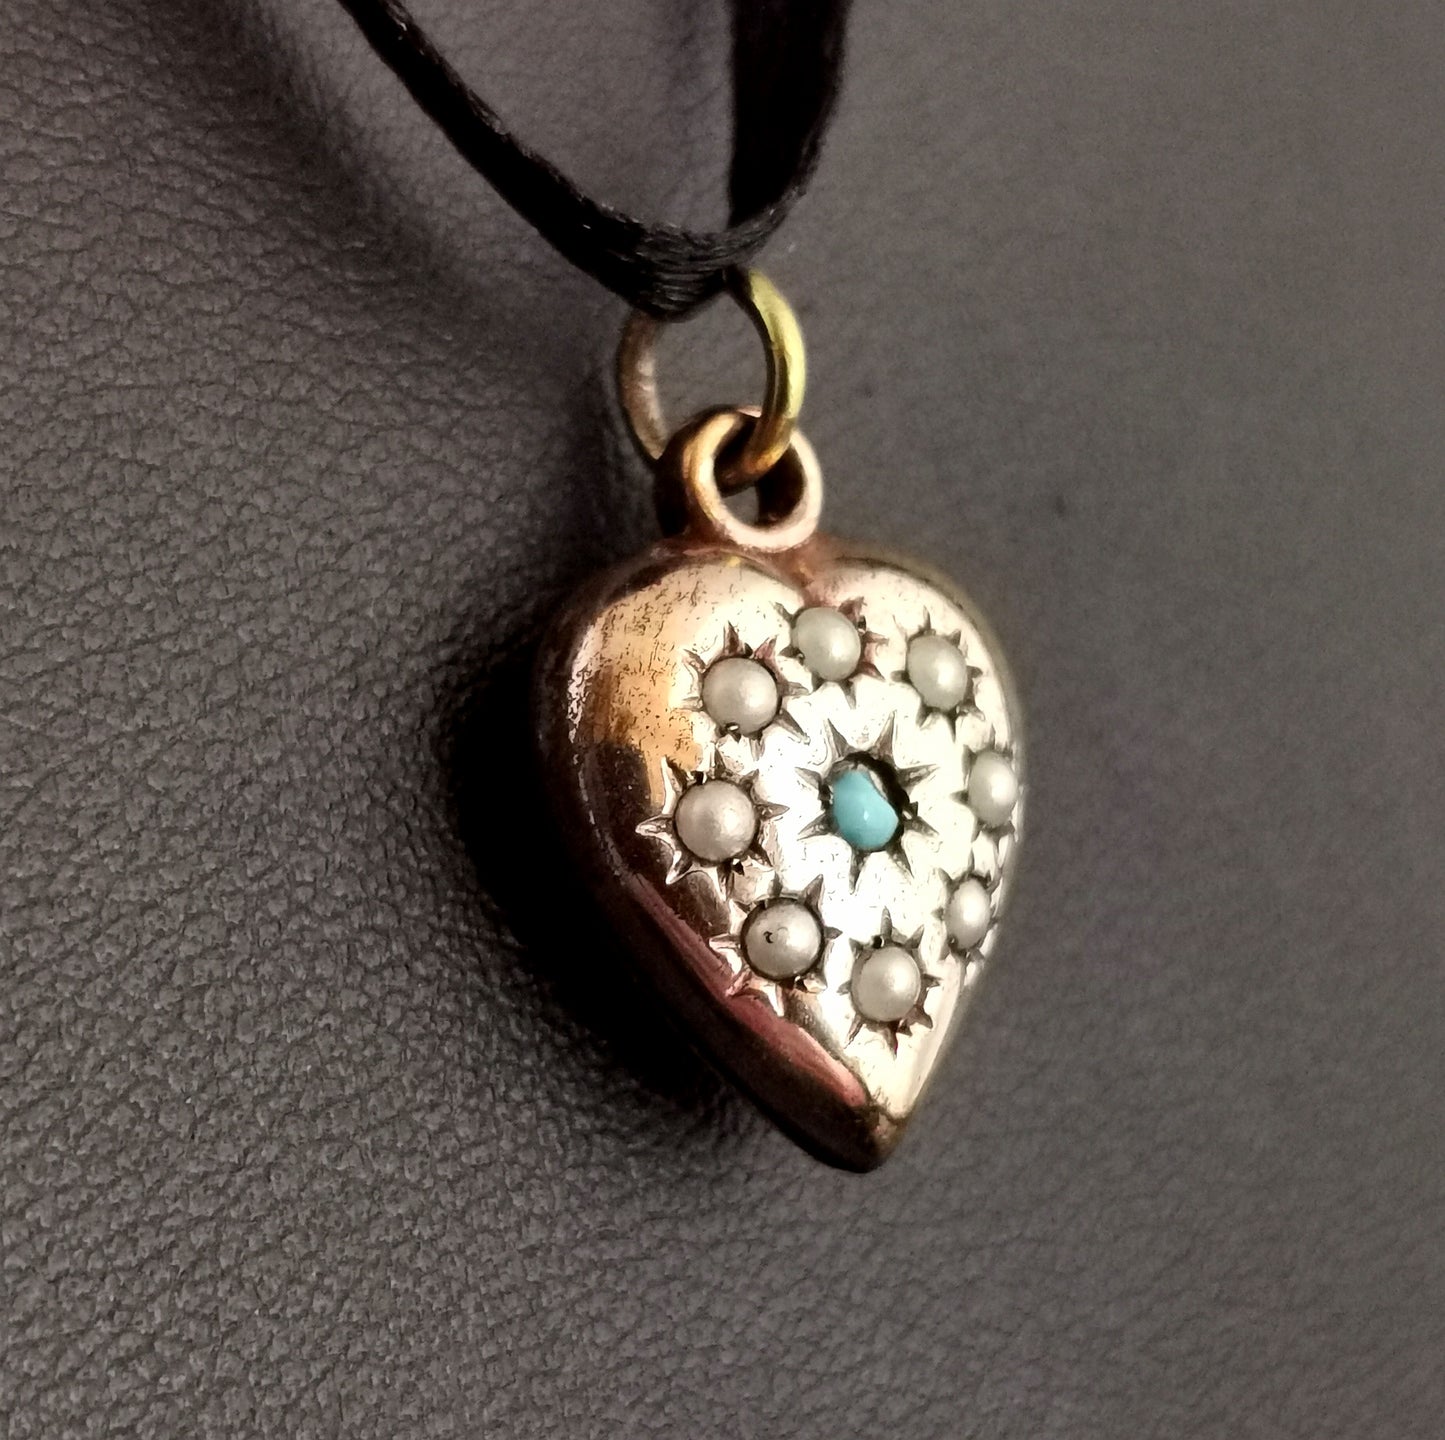 Antique puffy heart pendant, seed pearl and turquoise, gold plated